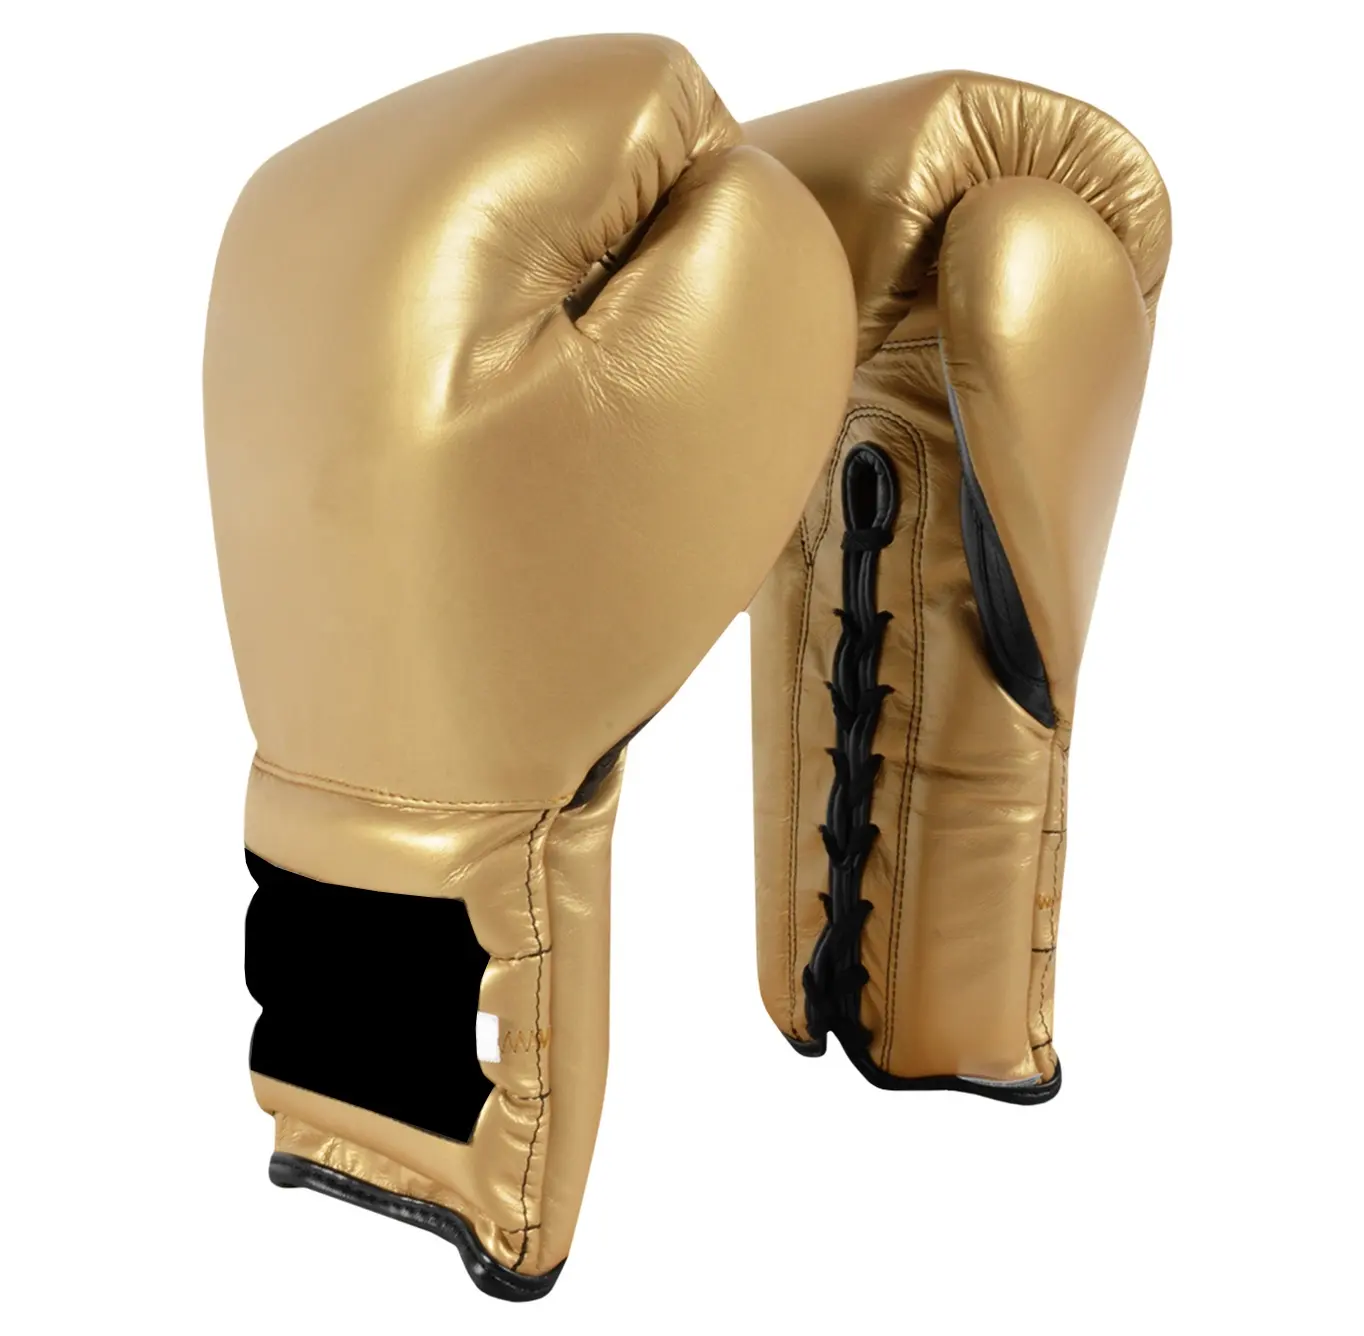 Custom Durable Your Own Logo Shine gold leather lace up Boxing Gloves Punching Sport Gloves For boxer Training Boxing Equipment